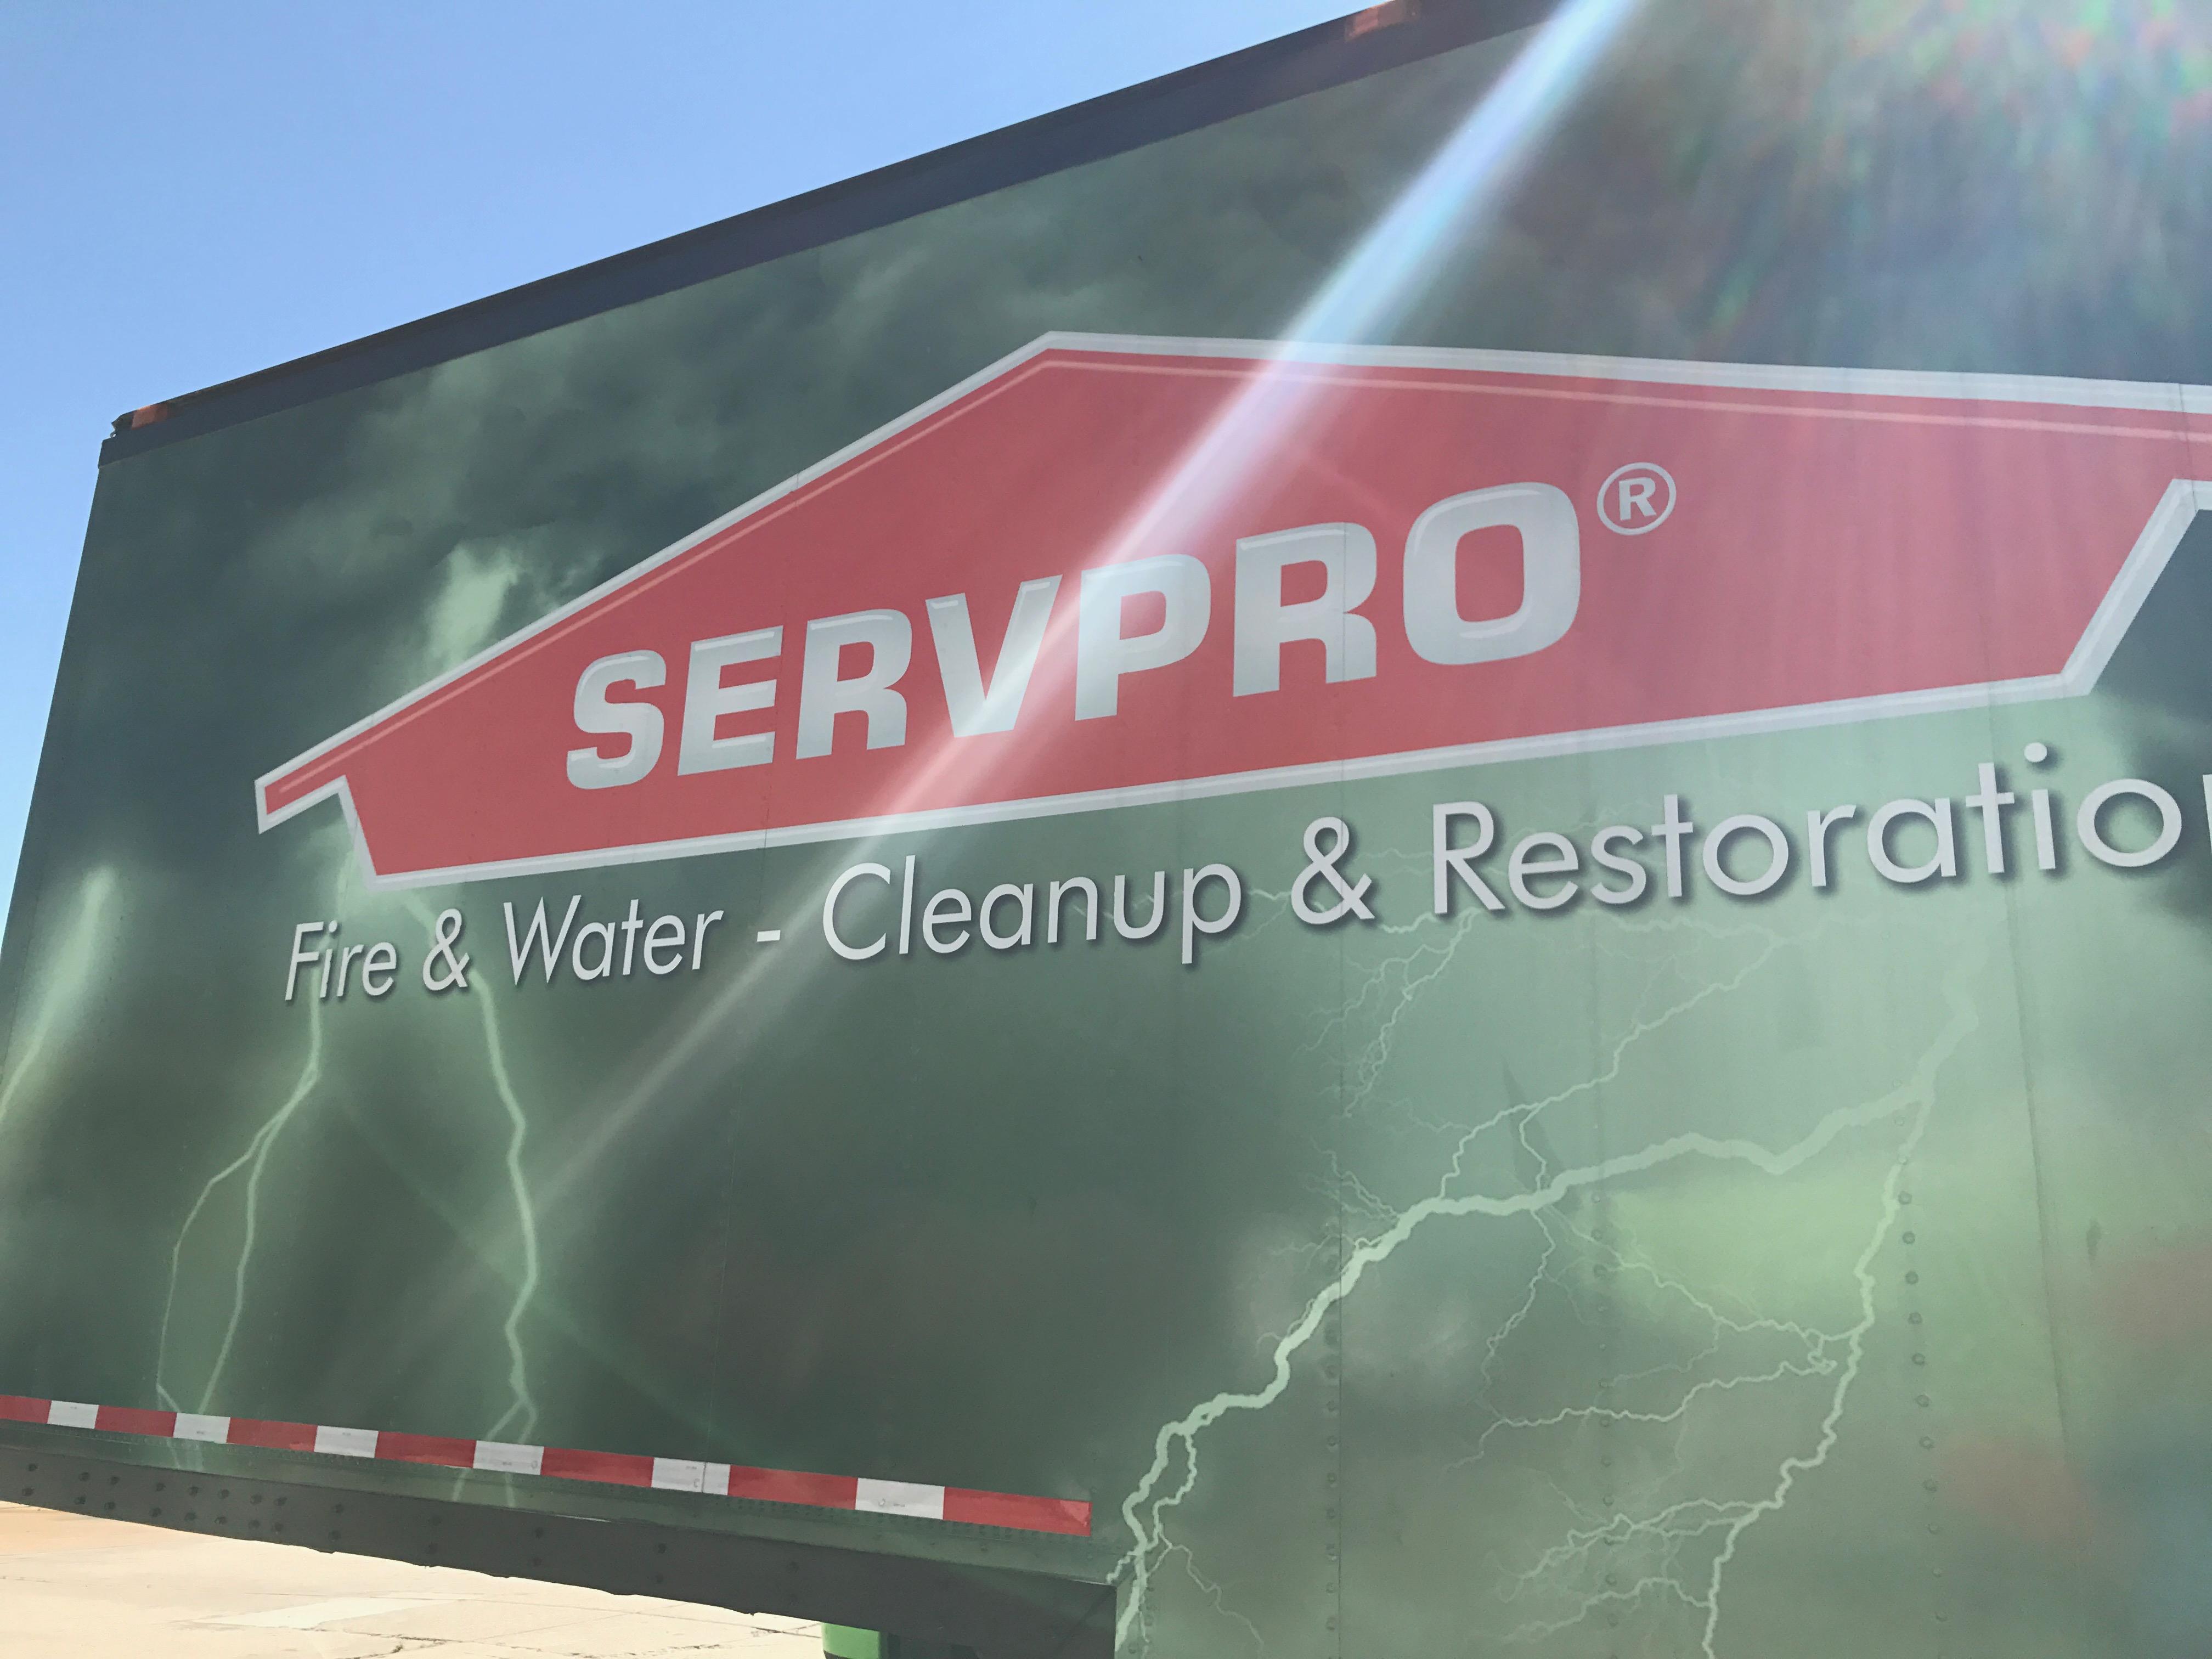 Here to help you with fire &amp; water cleanup and restoration!